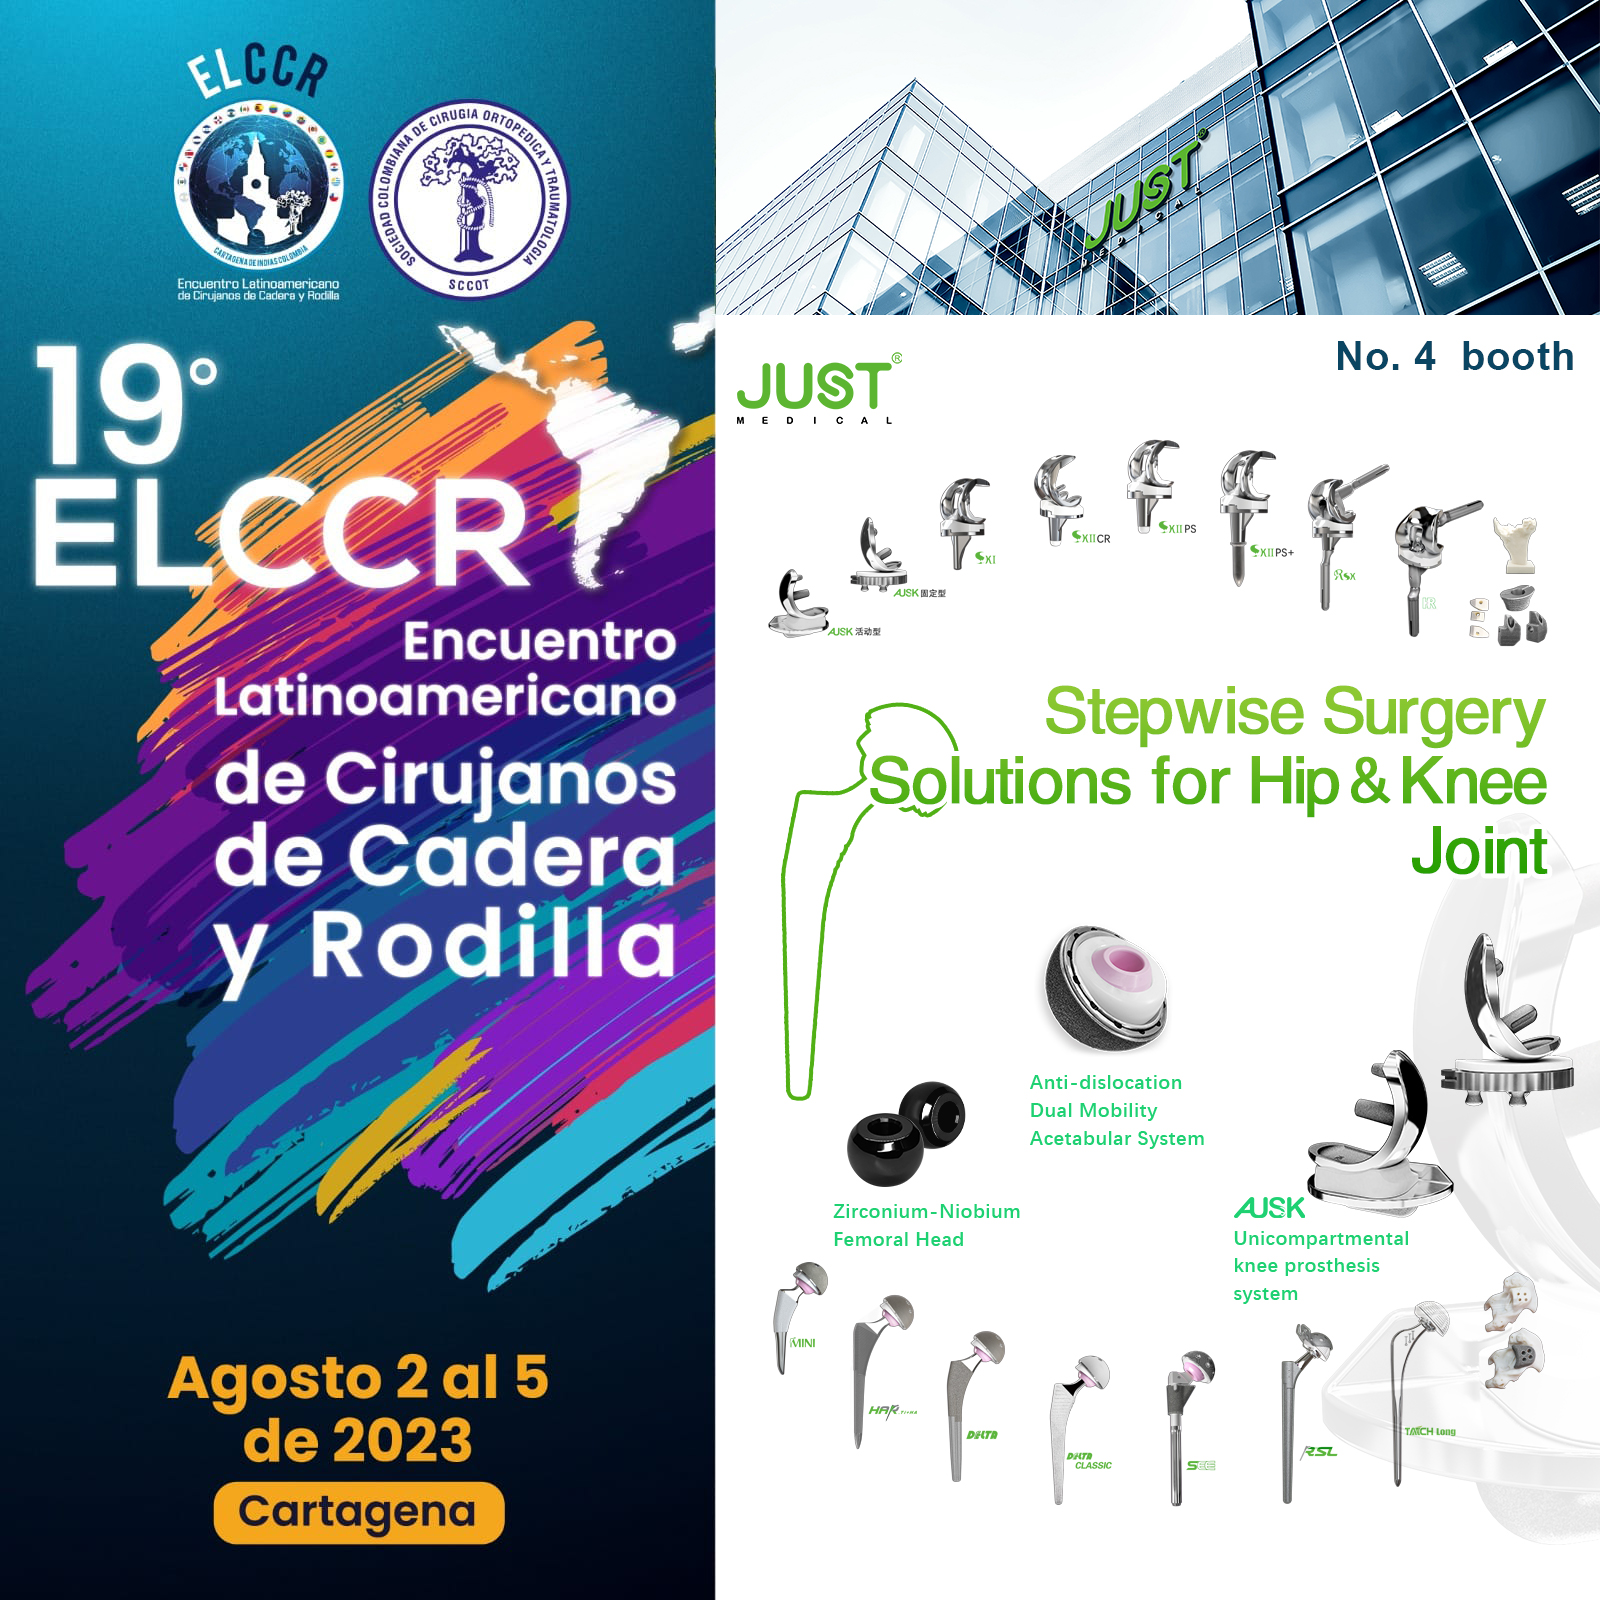 JUST Medical 19th Latin American Meeting of Hip and Knee Surgeons –ELCCR August 2-5th, Booth 4, Hotel Las Américas - Cartagena, Colombia Waiting for Your Joining.